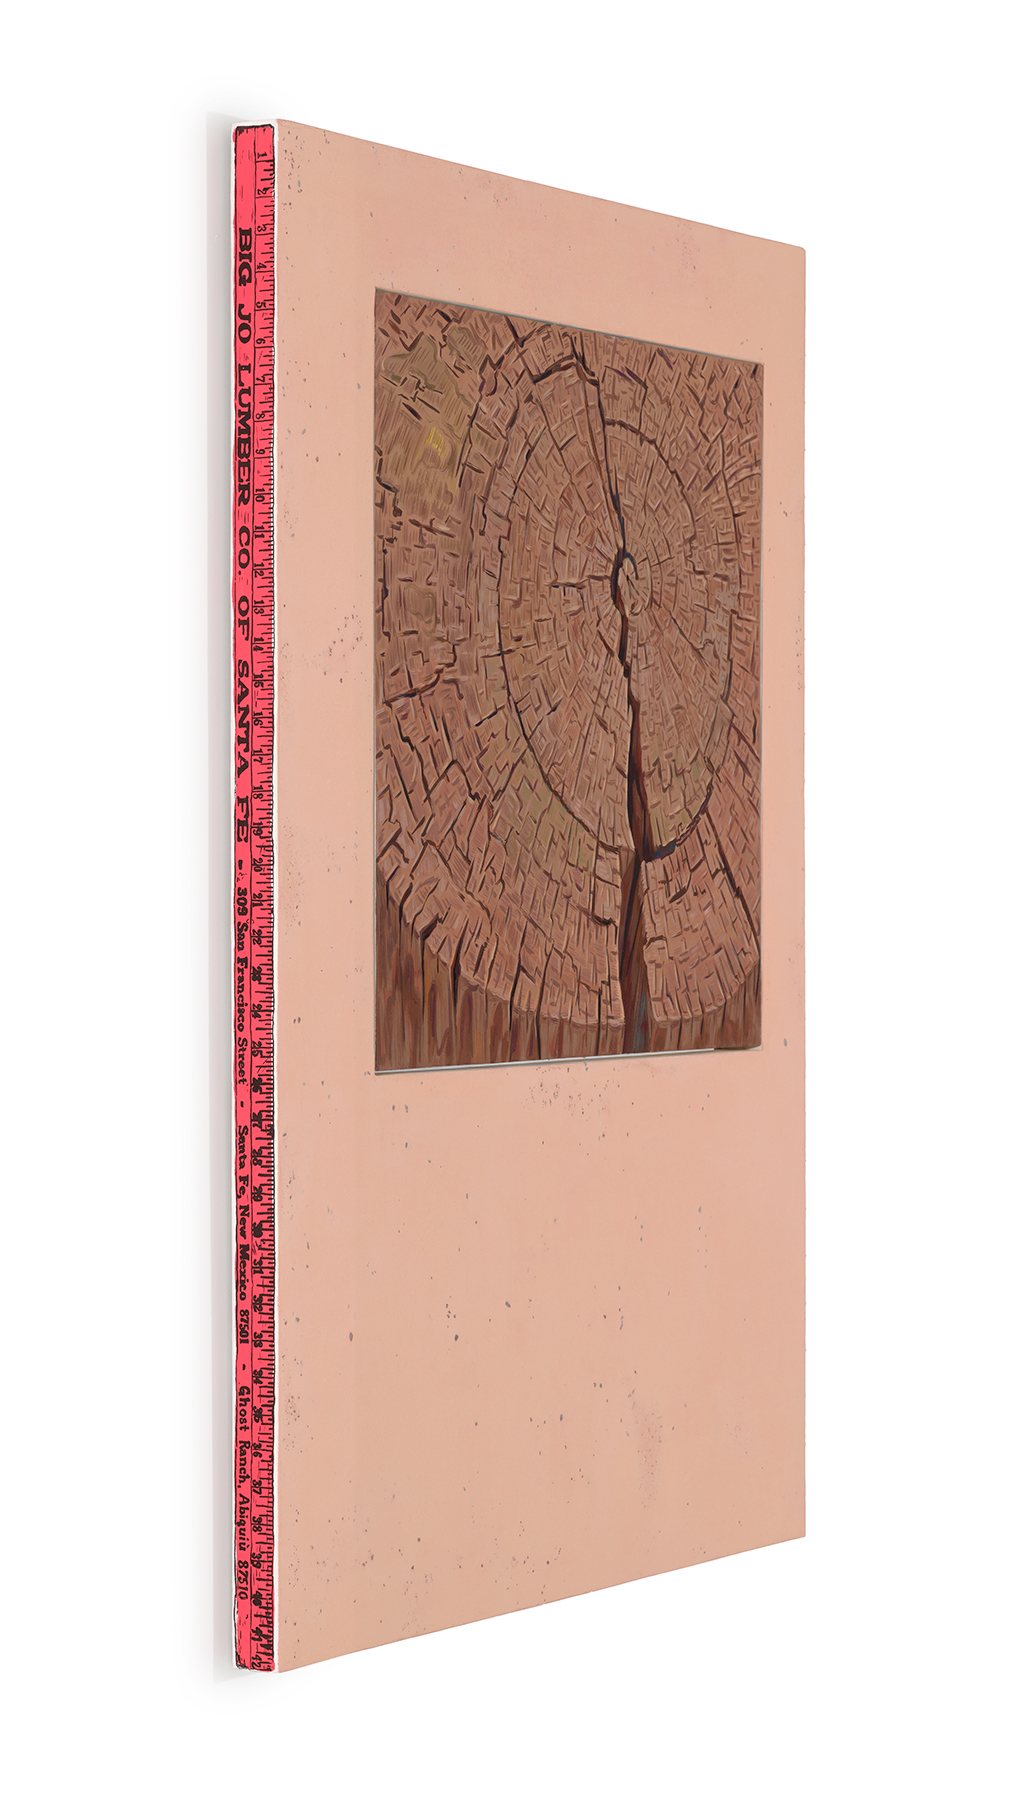 This is an image that shows the side view of O'Keeffe's Tree Stump showing a screen printed ruler painted along the edge of the painting with a pink background and black numbers.